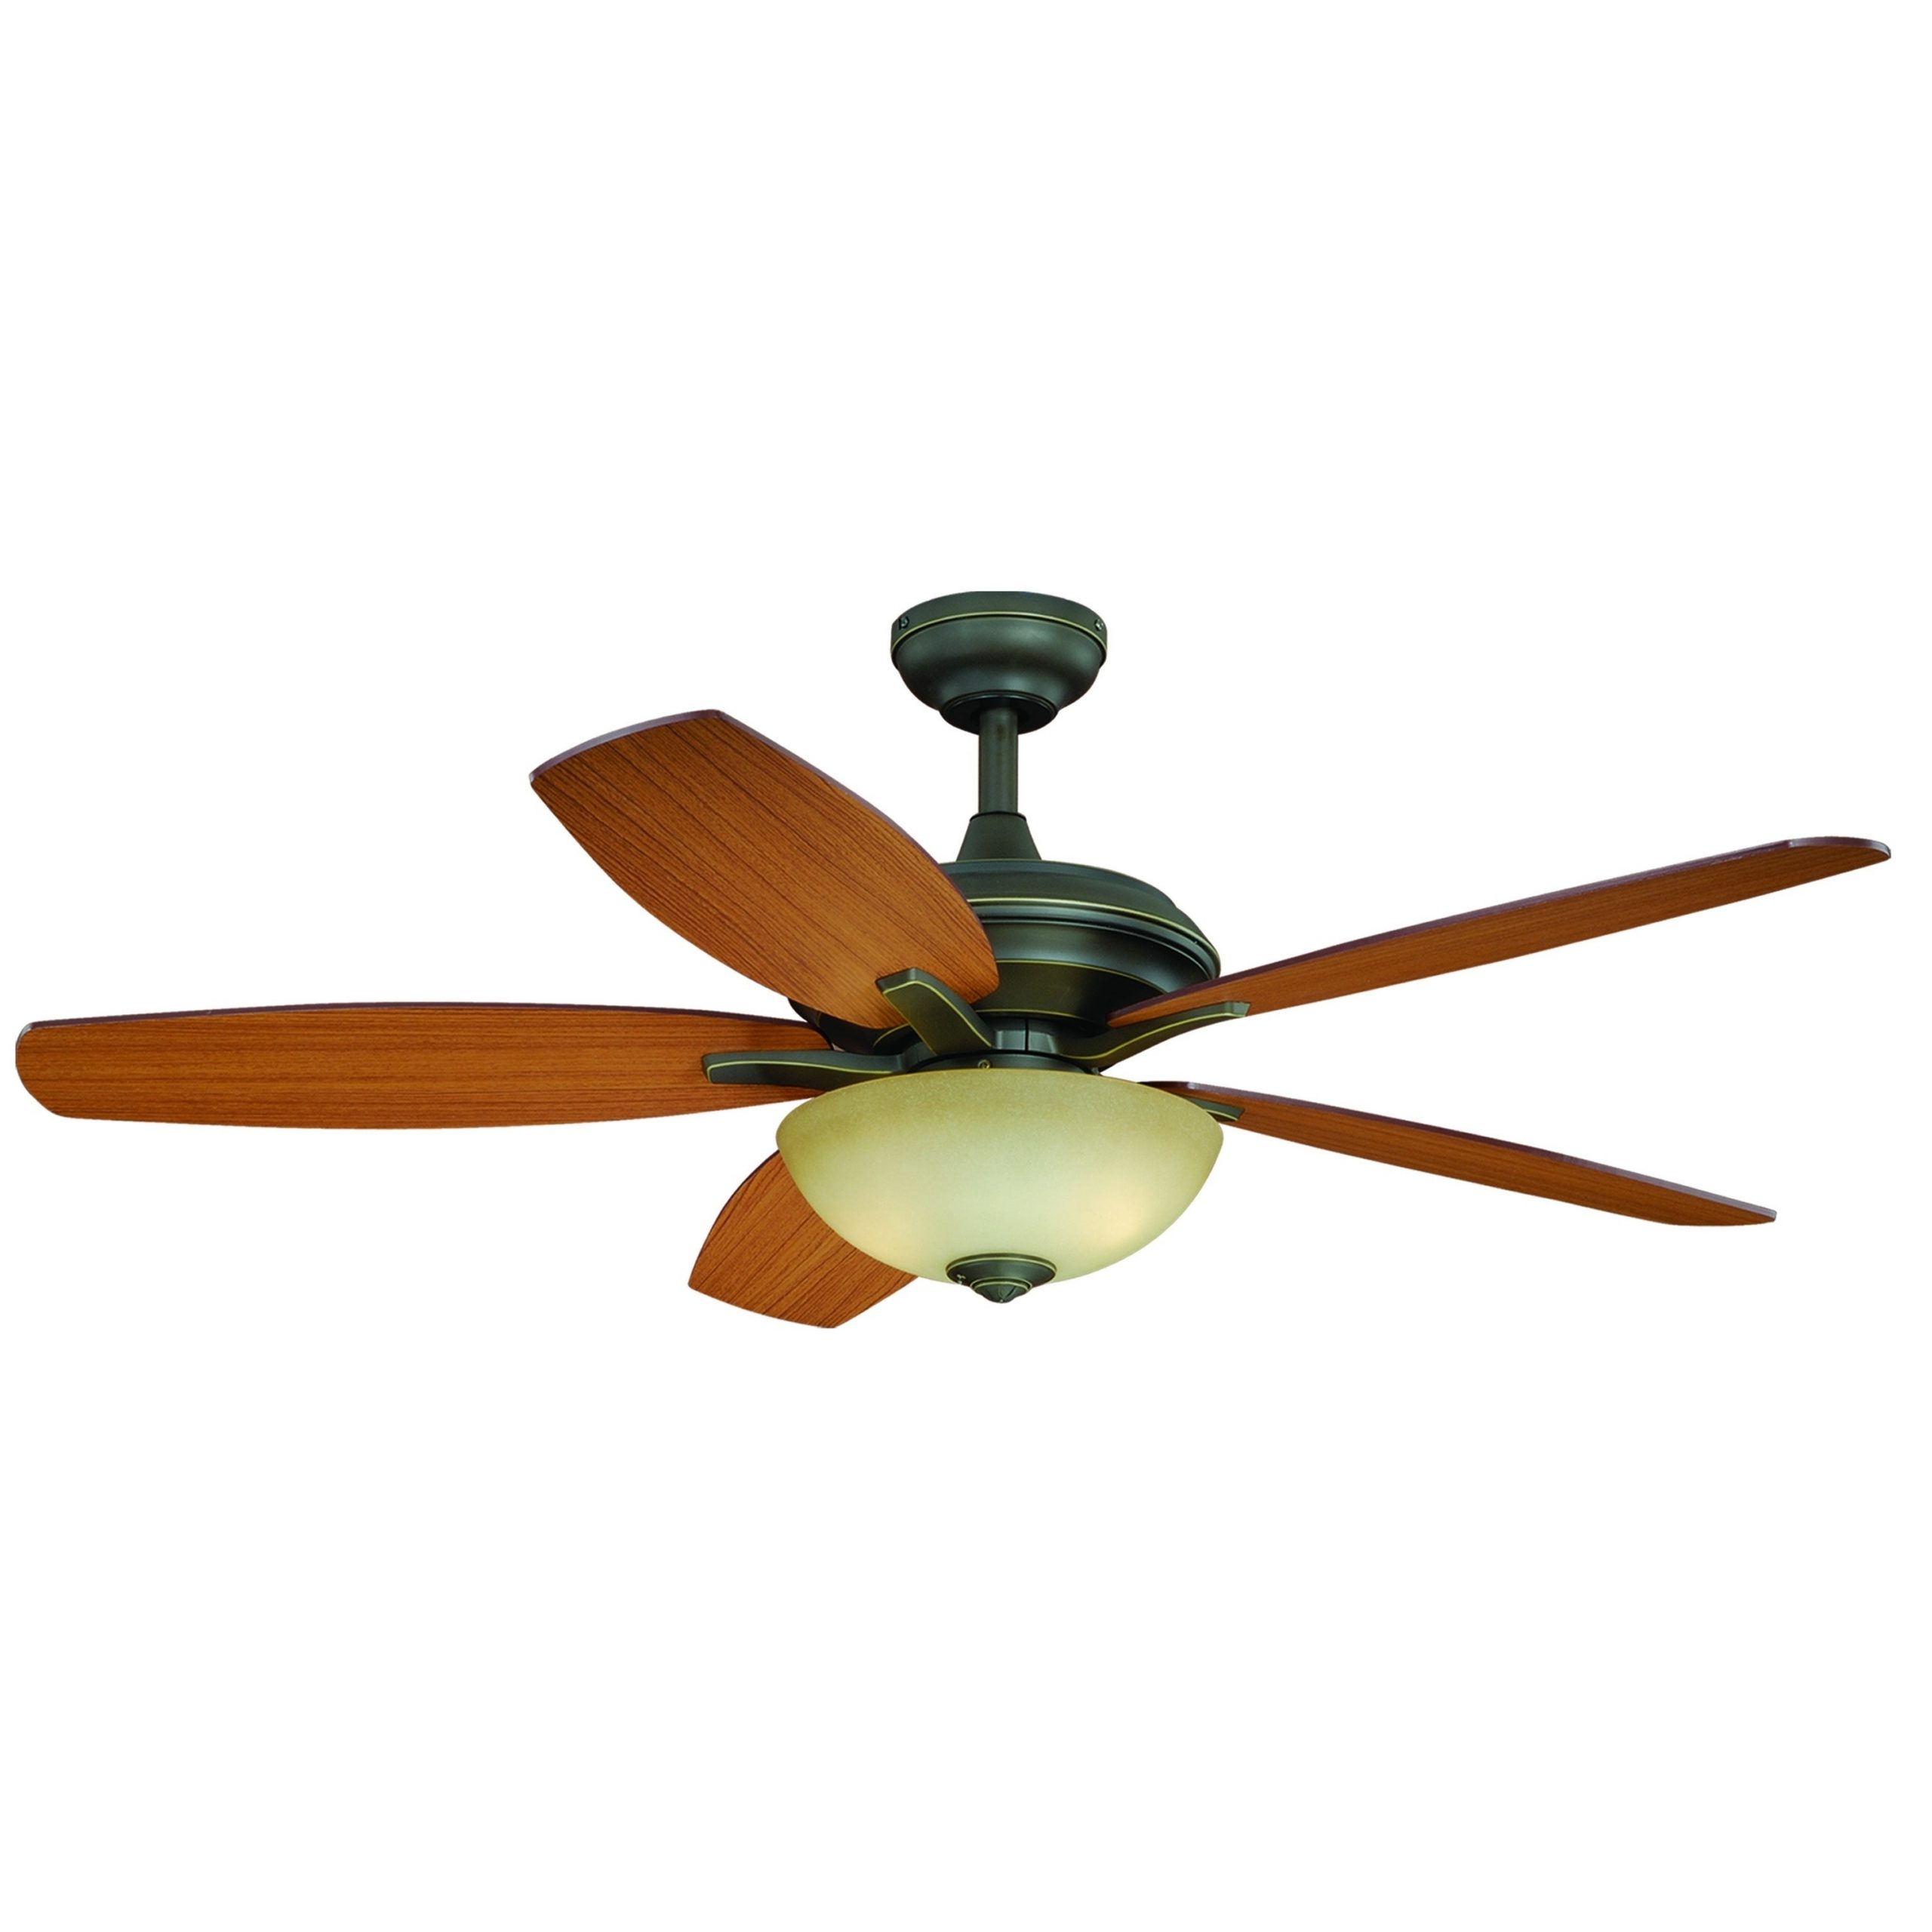 Valencia 52 In Bronze Ceiling Fan With Led Light Kit 52 In W X 19 In H X 52 In D in sizing 3000 X 3000